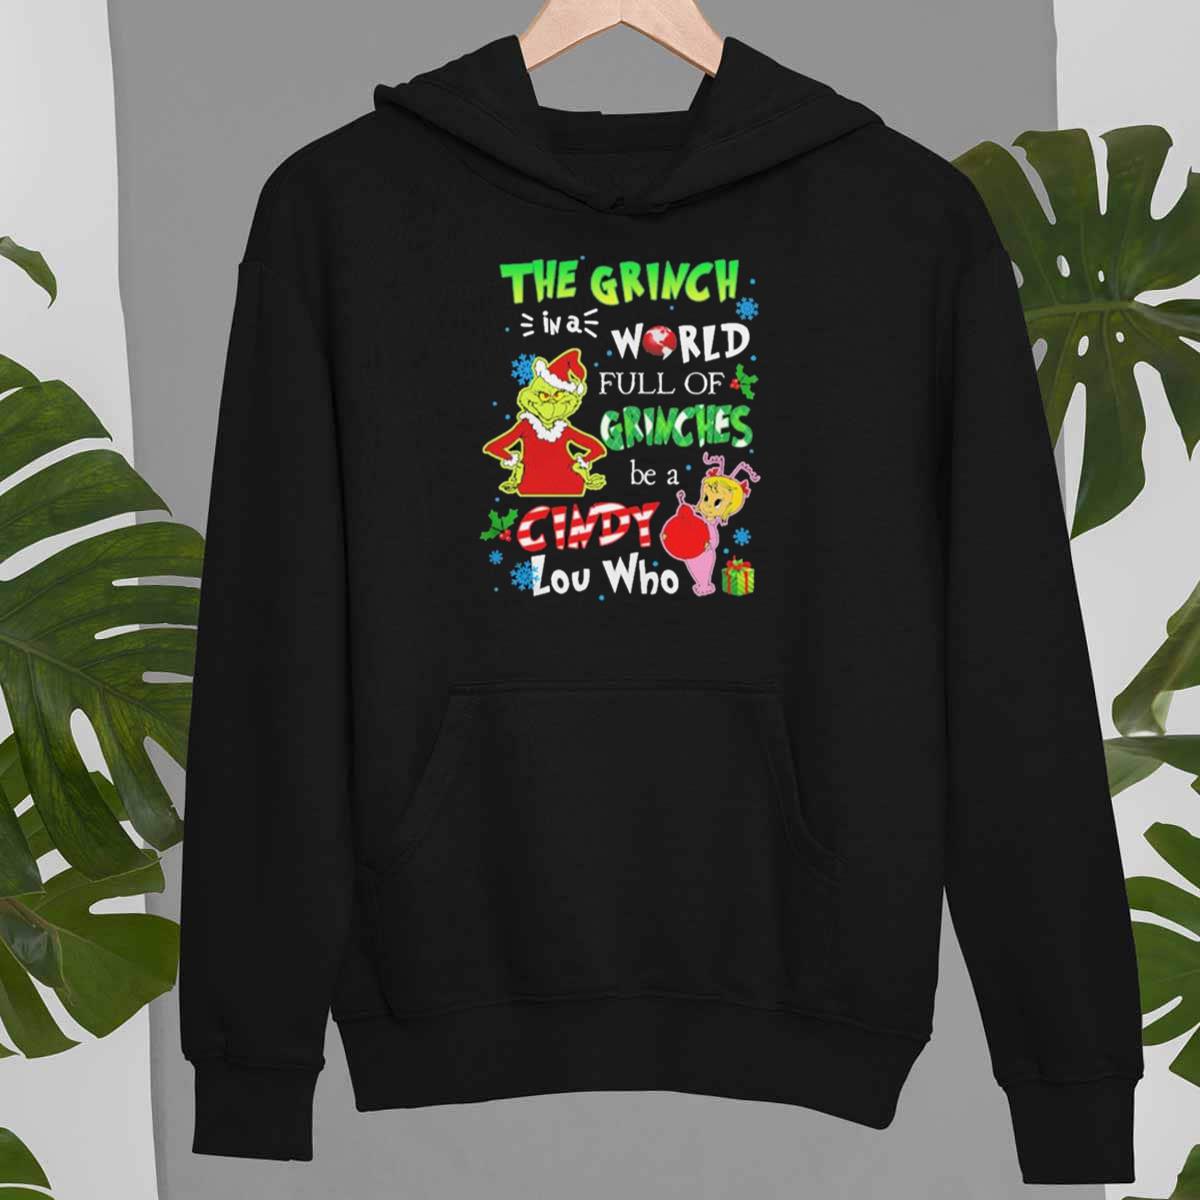 In A World Full Of Grinches Be A Cindy Lou Who Christmas Unisex Sweatshirt Hoodie